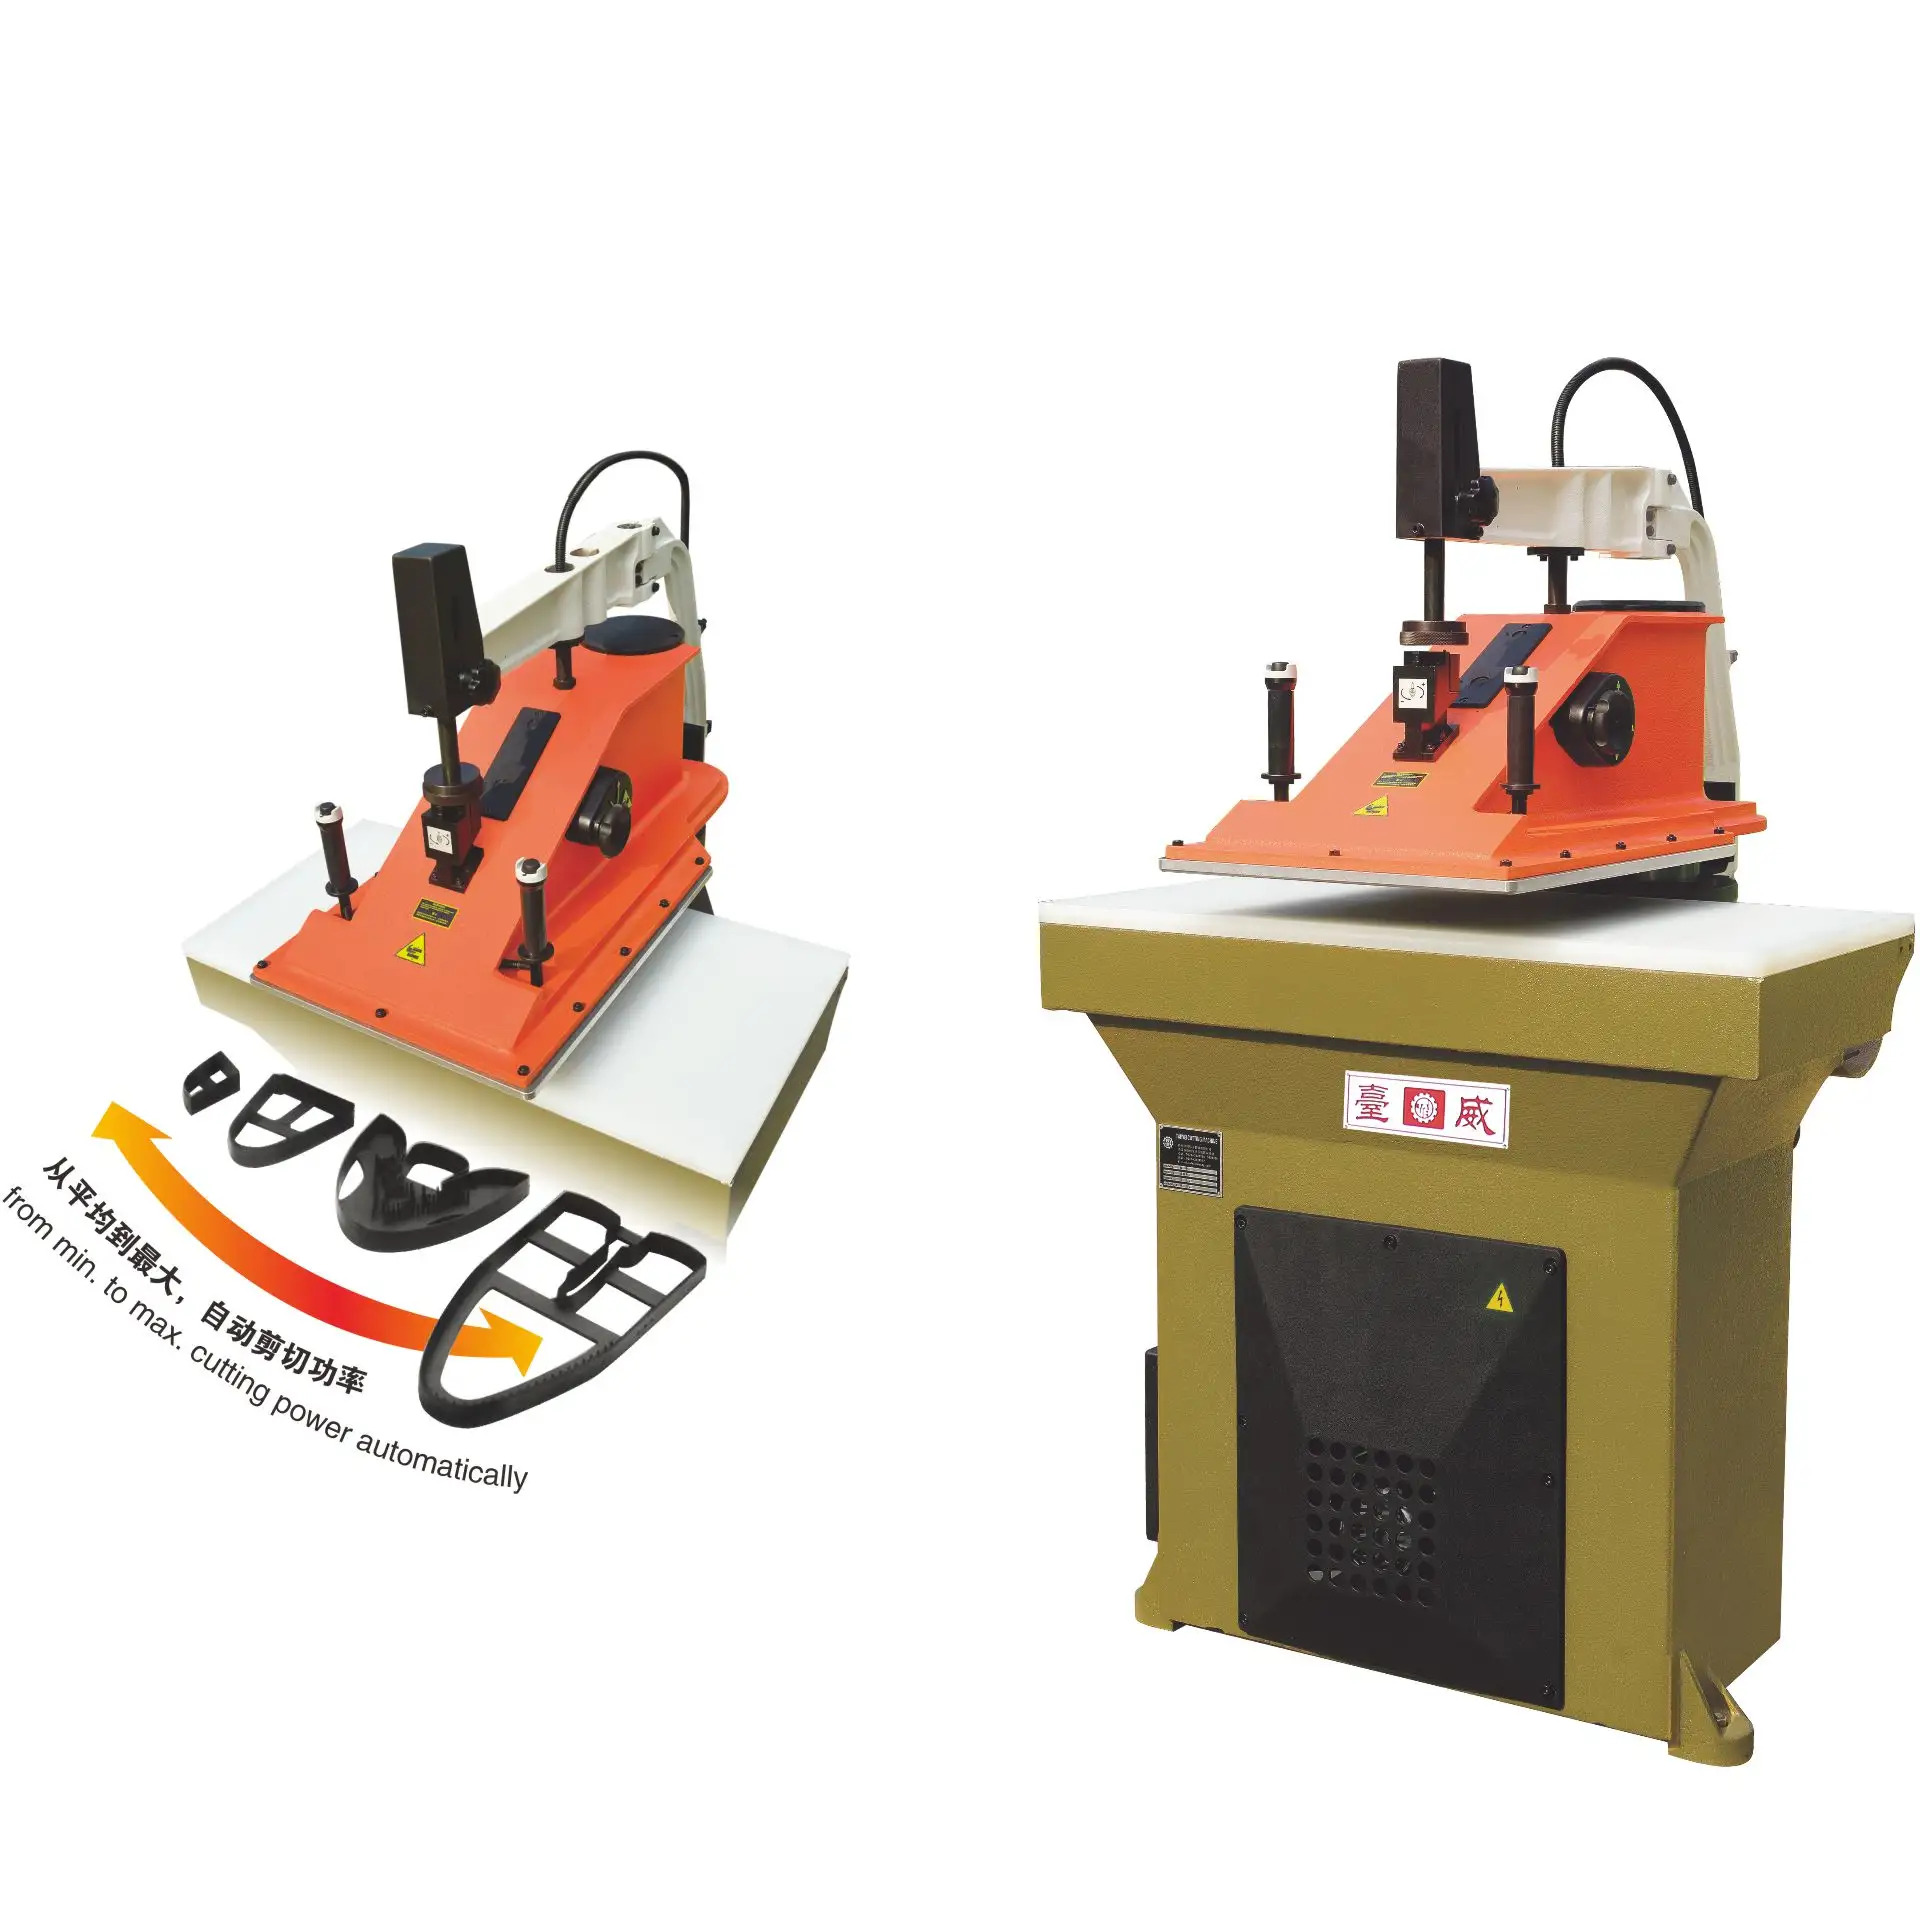 TW-20C manual hydraulic press cutting machine with turning arm die cutting clicker press other shoe making machines